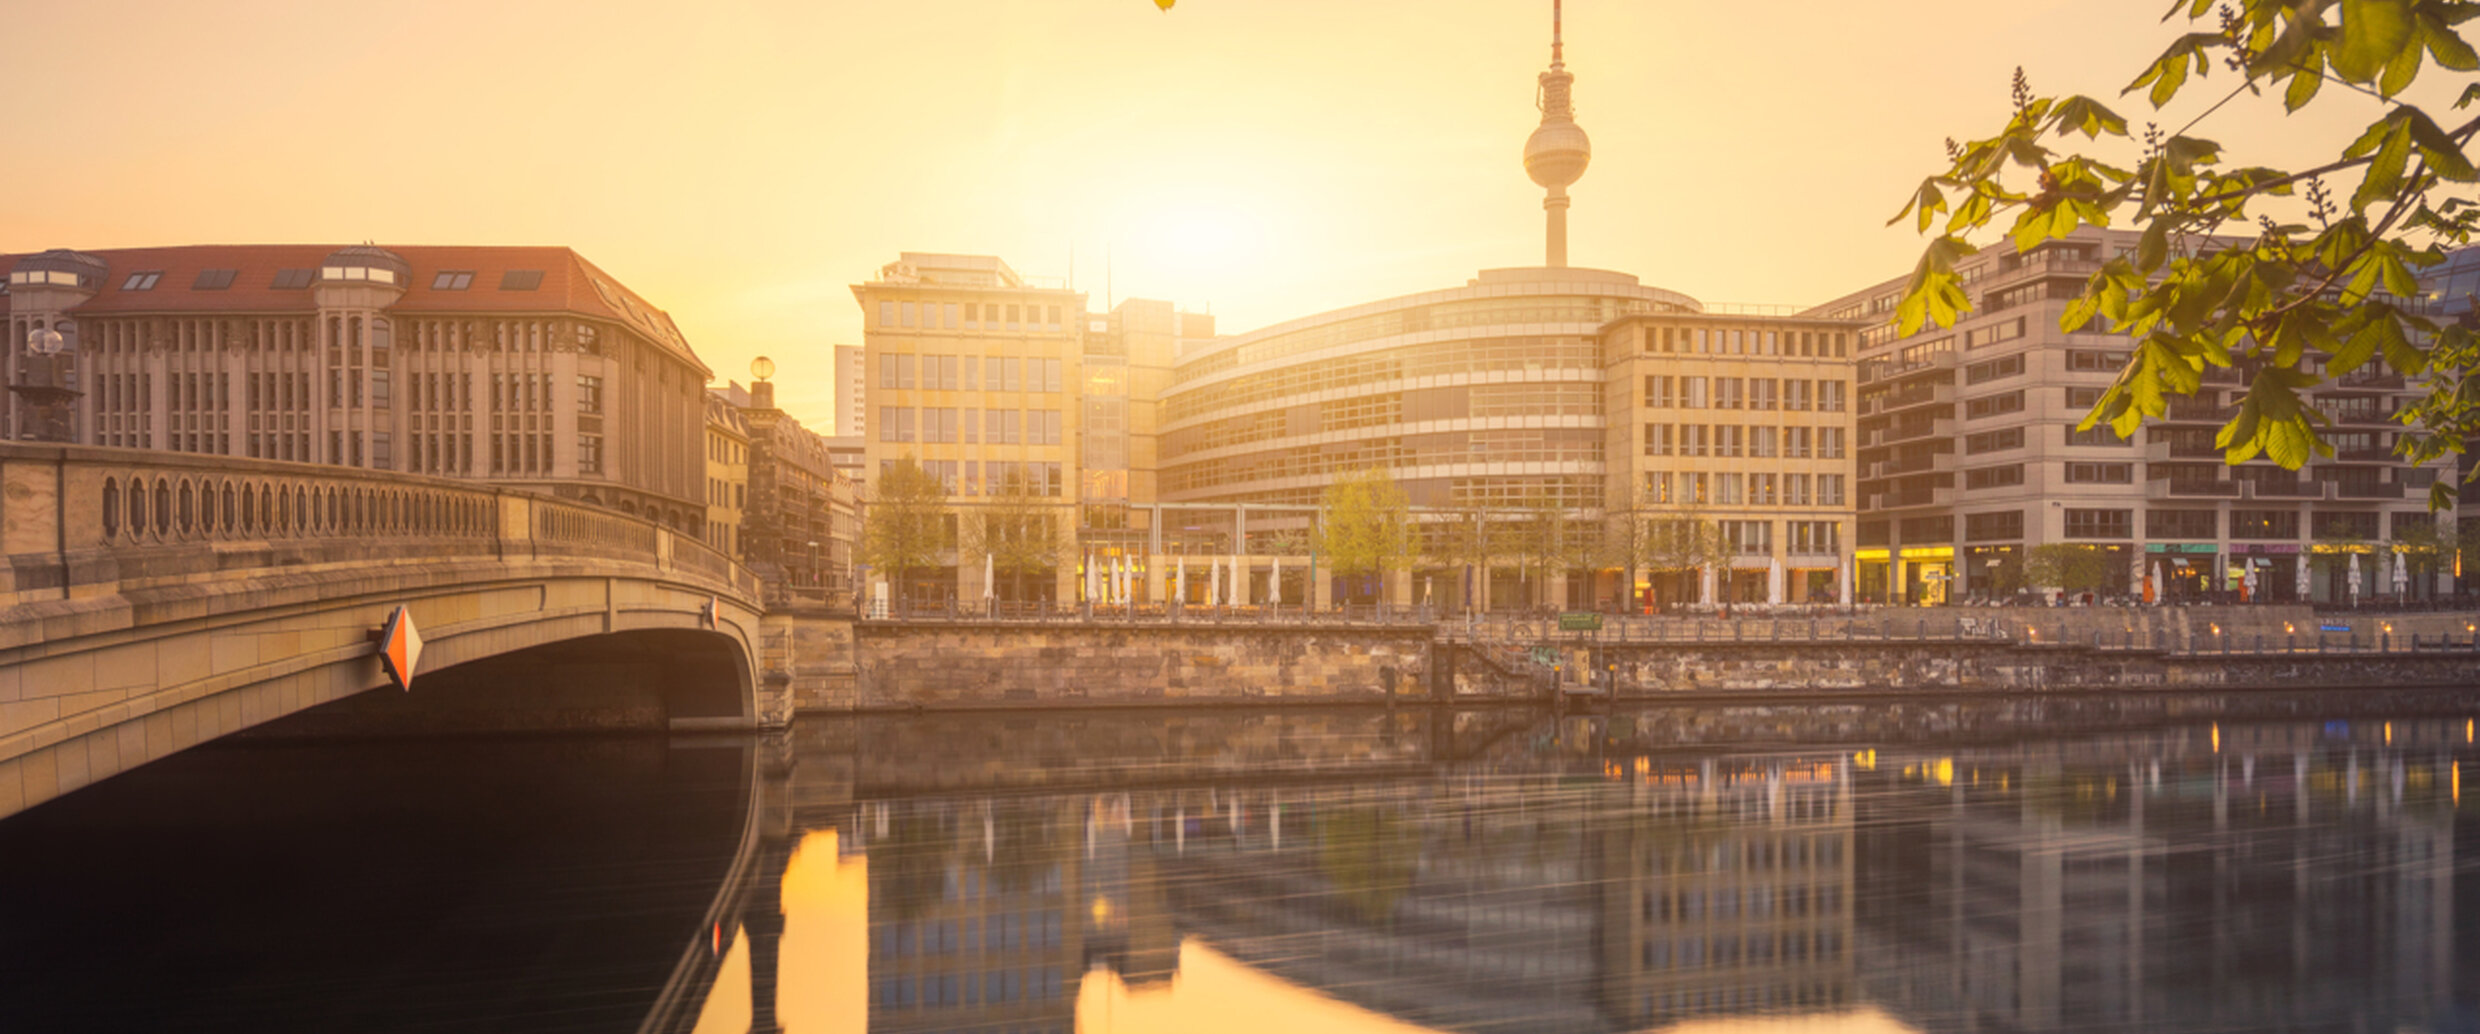 11 summerly places at the Spree | visitBerlin.de